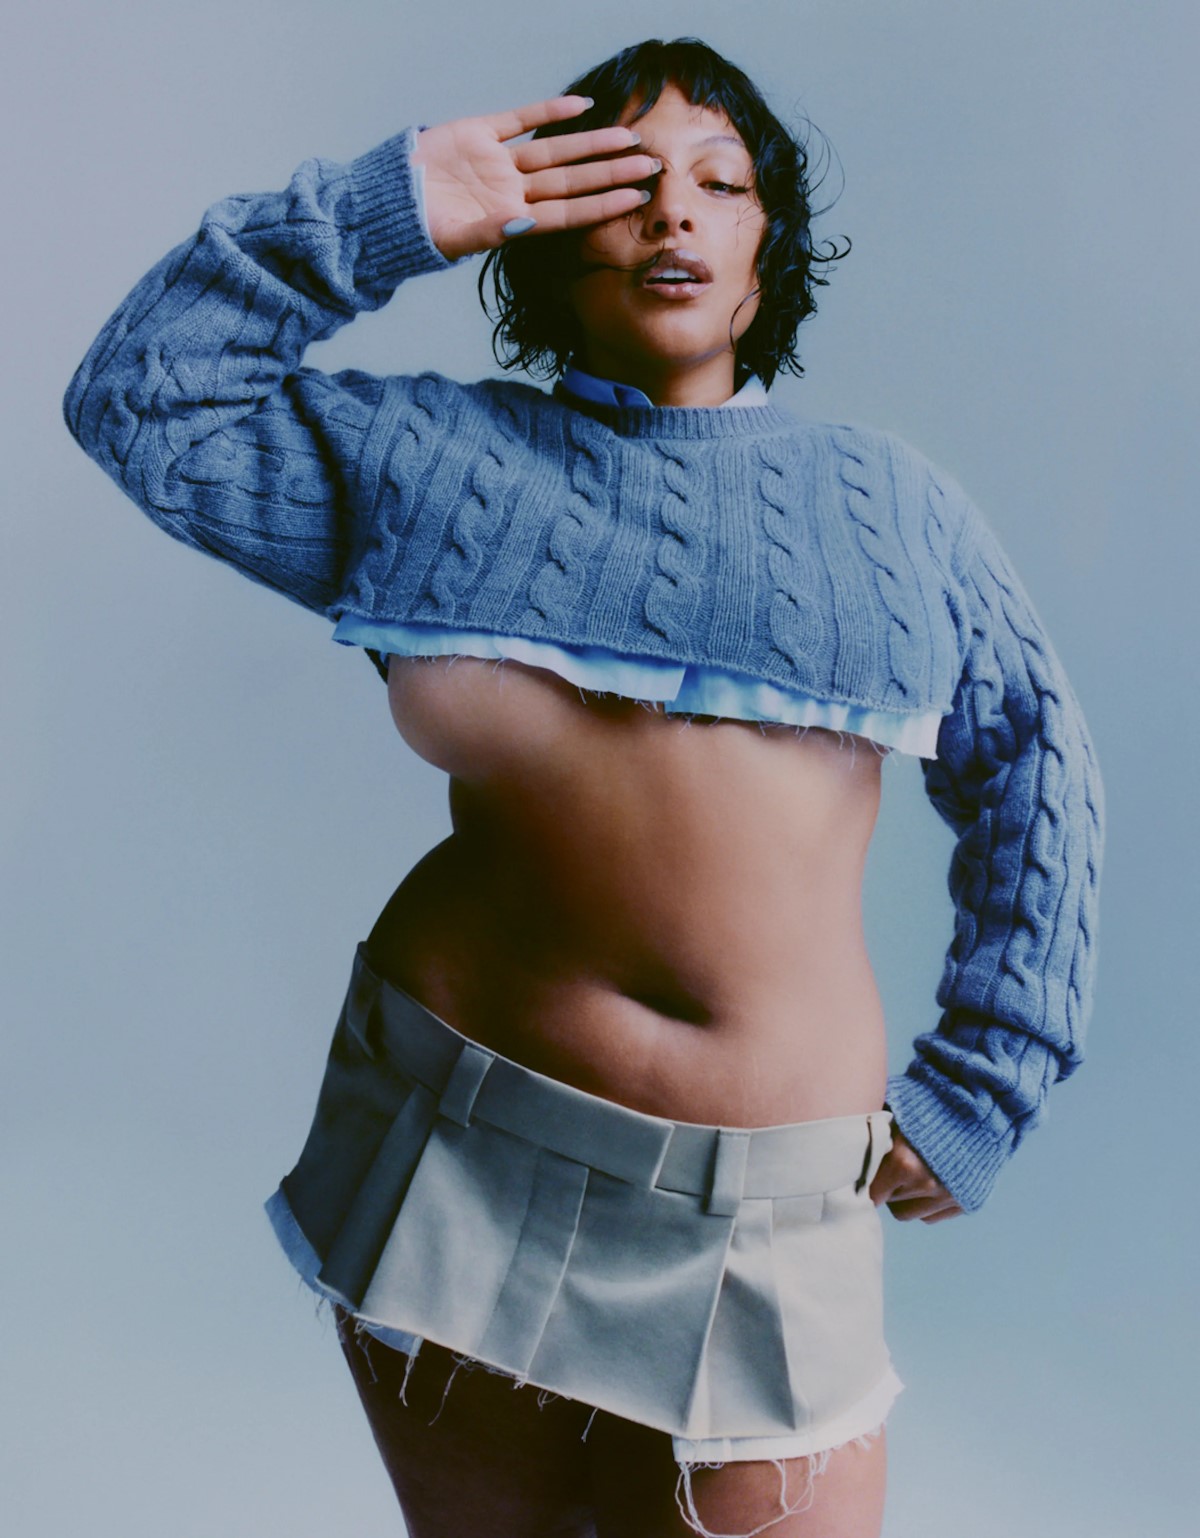 Paloma Elsesser covers i-D Magazine Issue 367 by Sam Rock